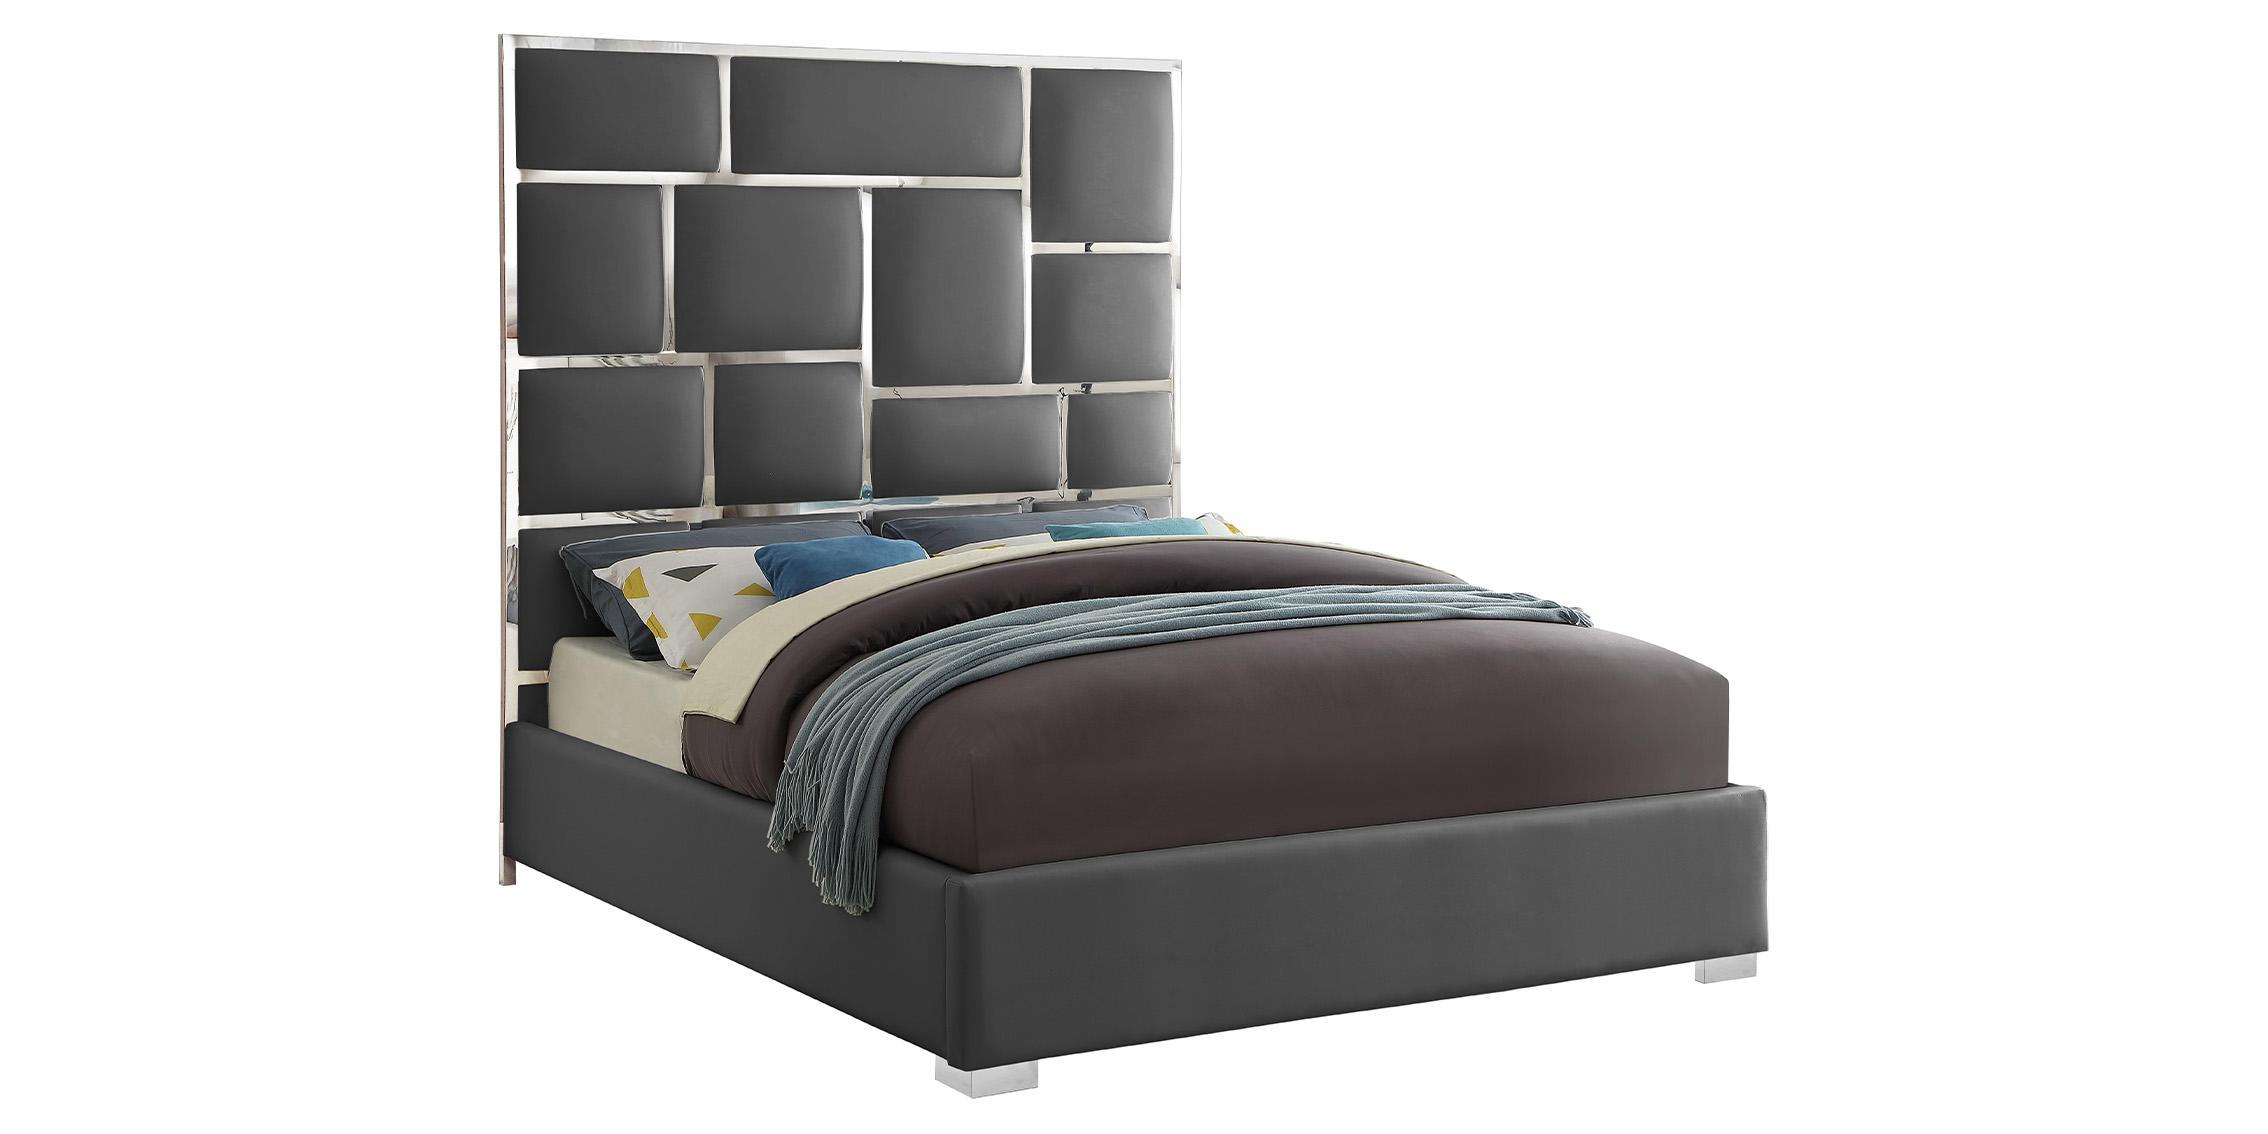 Contemporary Platform Bed MILAN Grey-K MilanGrey-K in Chrome, Gray Faux Leather